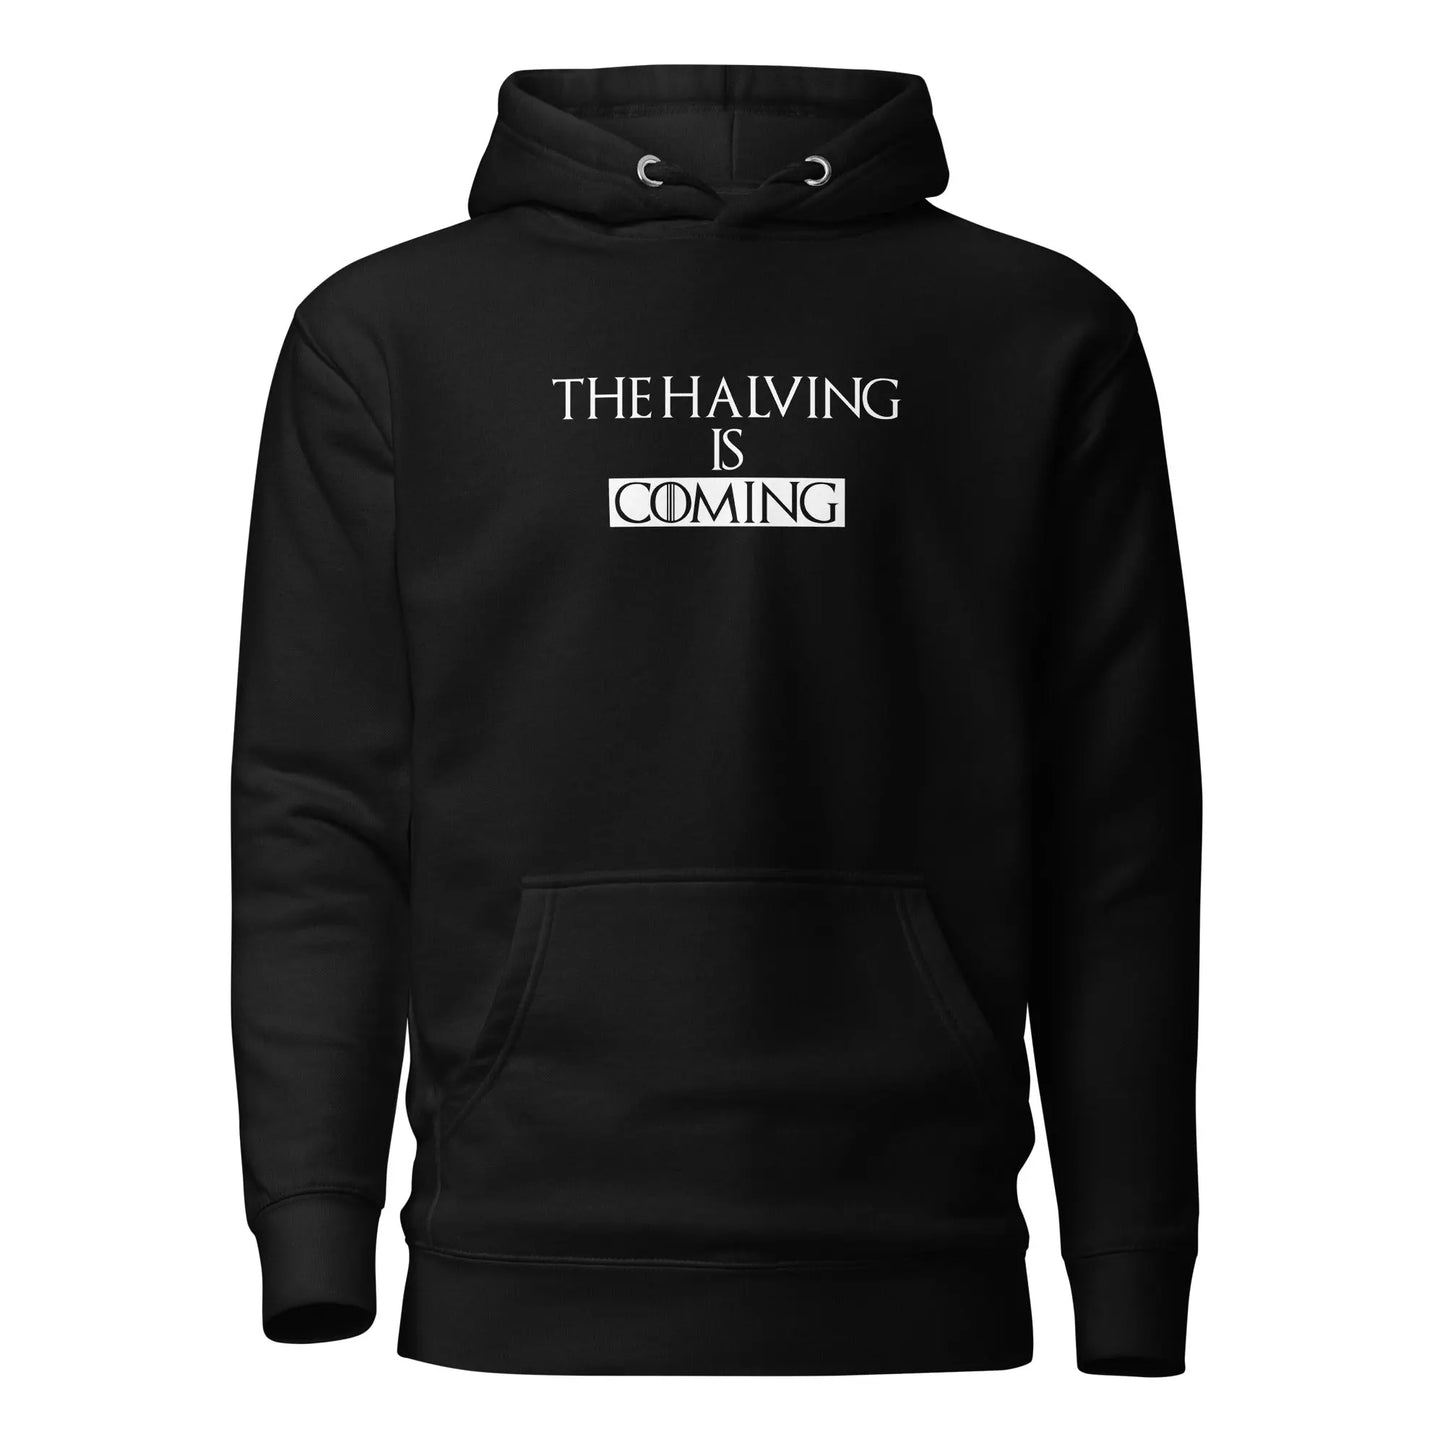 The Halving Is Coming - Premium Unisex Bitcoin Hoodie Black Color